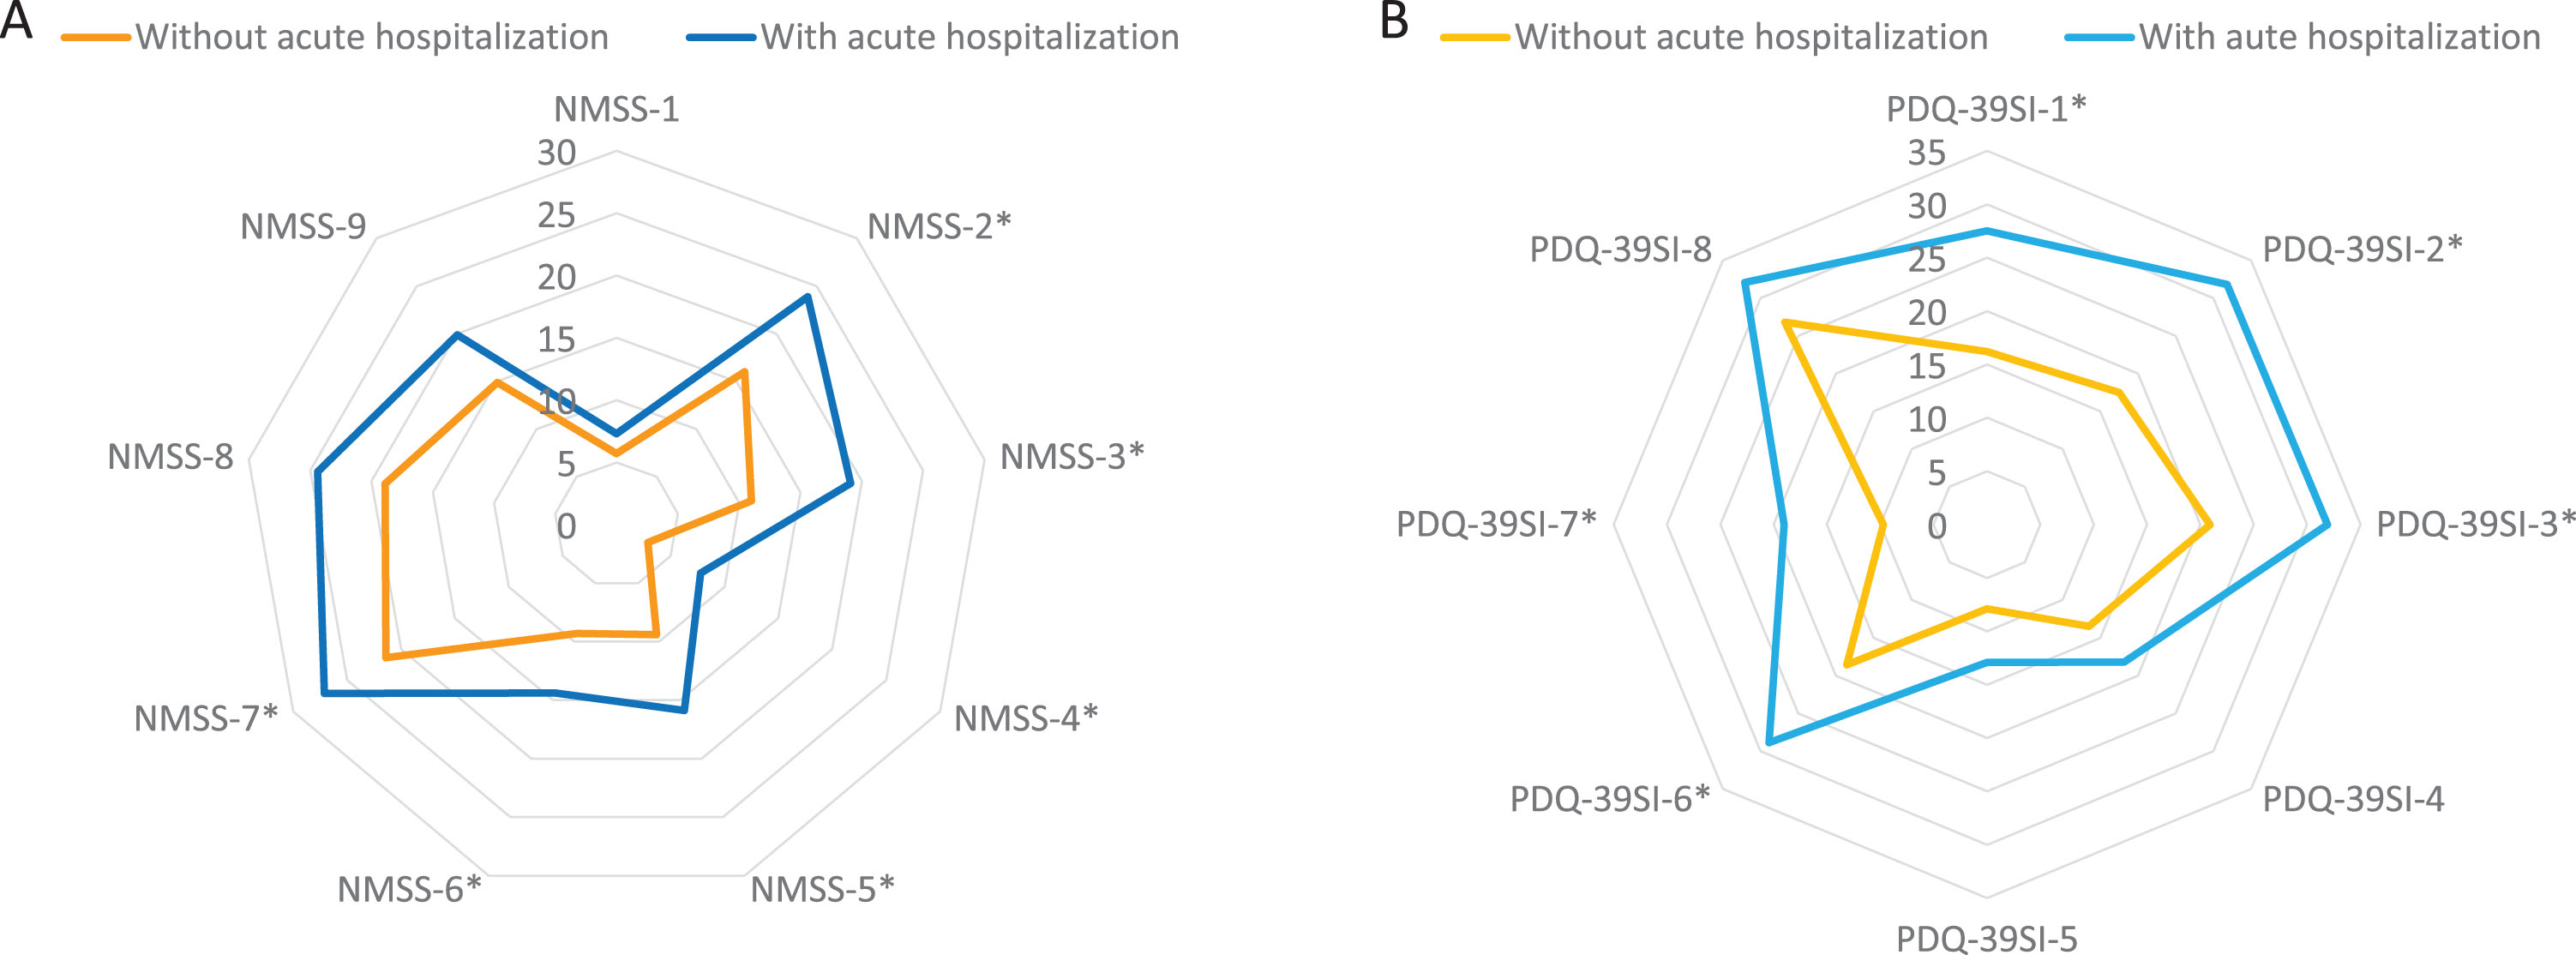 A) Comparison in PD patients with vs without acute hospitalization of mean NMSS score on each domain of the scale at baseline; NMSS-1, Cardiovascular (p = 0.892); 2) NMSS-2, Sleep/fatigue (p = 0.003); NMSS-3, Depression/apathy (p = 0.003); NMSS-4, Perceptual problems/hallucinations (p = 0.001); NMSS-5, Attention/memory (p = 0.001); NMSS-6, Gastrointestinal tract (p = 0.041); NMSS-7, Urinary symptoms (p = 0.040); NMSS-8, Sexual dysfunction (p = 0.152); NMSS-9, Miscellaneous (p = 0.106). B) Comparison in PD patients with vs without acute hospitalization of mean PDQ-39SI score on each domain of the scale: PDQ-39SI-1, Mobility (p = 0.001); PDQ-39SI-2, Activities of daily living (p = 0.002); PDQ-39SI-3, Emotional well-being (p = 0.002); PDQ-39SI-4, Stigma (p = 0.153); PDQ-39S-5, Social support (p = 0.259); PDQ-39SI-6, Cognition (p = 0.001); PDQ-39SI-7, Communication (p < 0.0001); PDQ-39SI-8, Pain and discomfort (p = 0.133). NMS, Non-motor symptoms; PD, Parkinson’s disease.